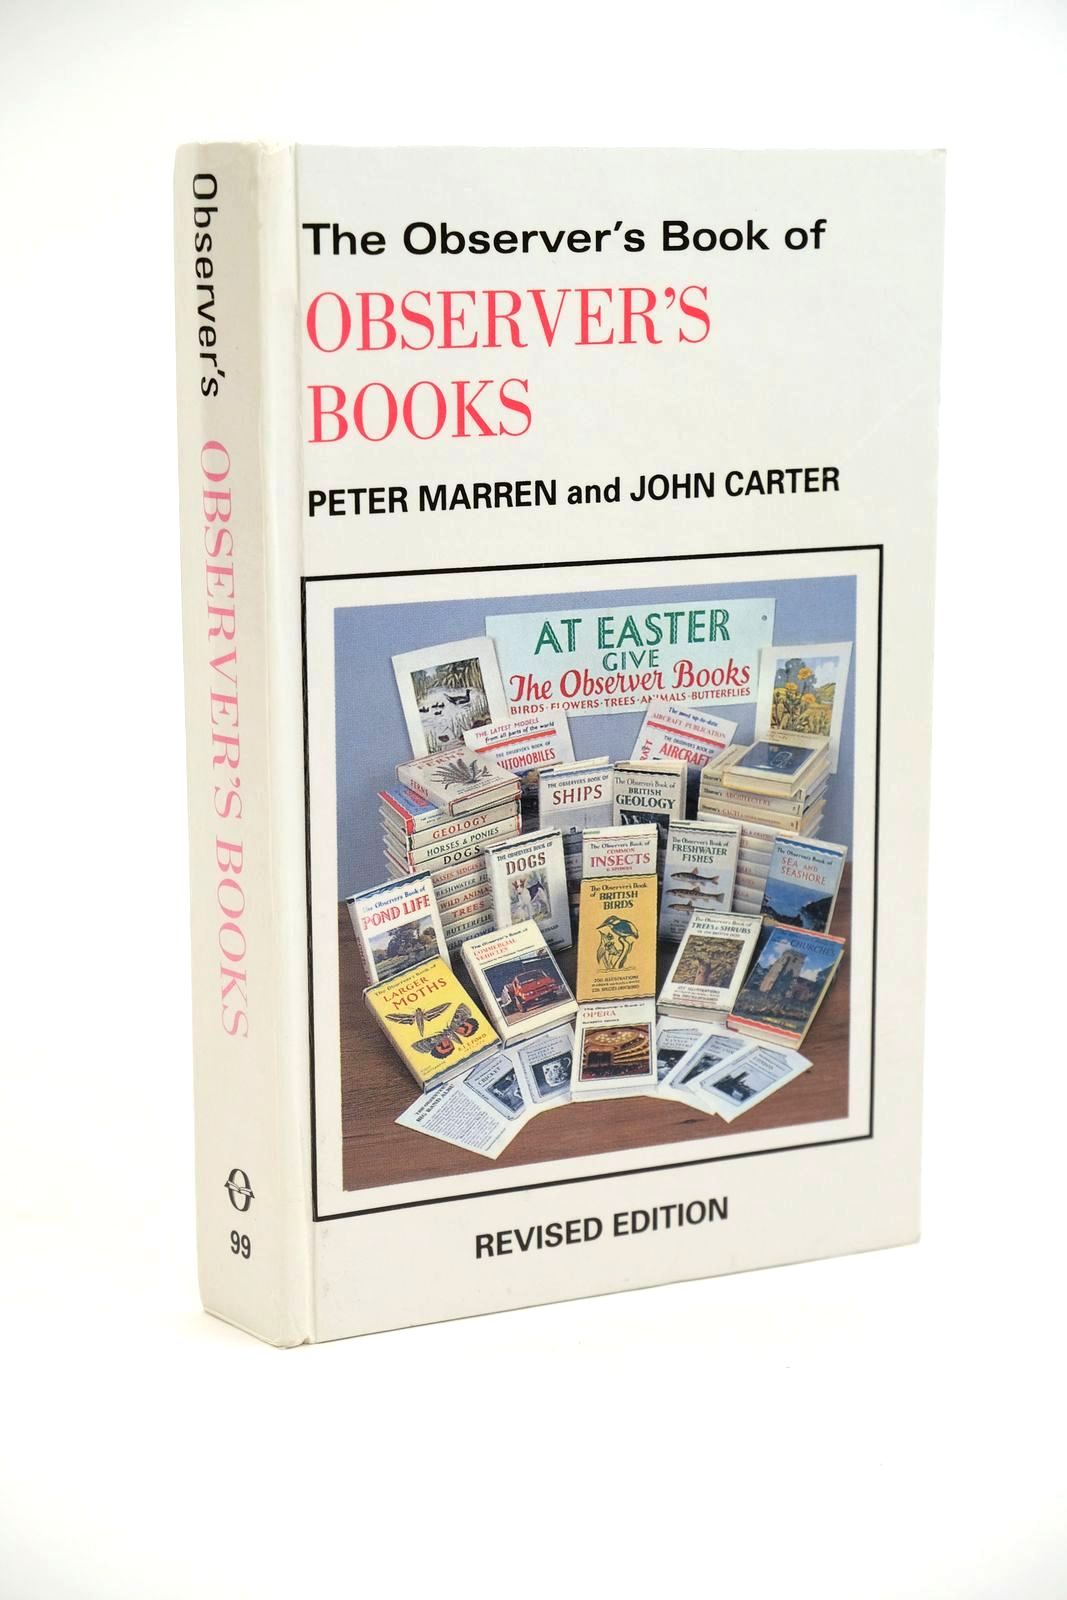 Photo of THE OBSERVER'S BOOK OF OBSERVER'S BOOKS written by Marren, Peter Carter, John published by Peregrine Books (STOCK CODE: 1323225)  for sale by Stella & Rose's Books